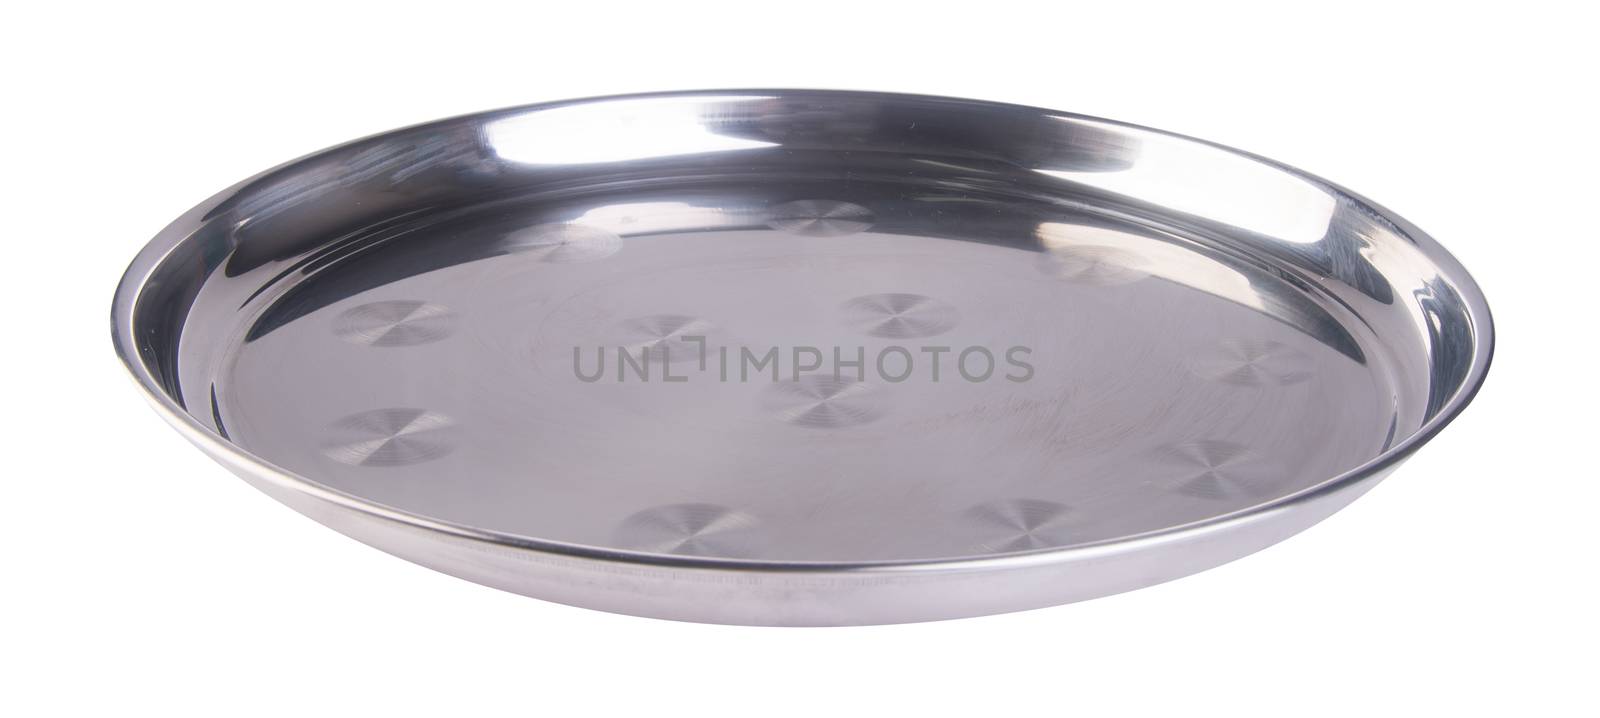 Tray. metal empty tray on a background